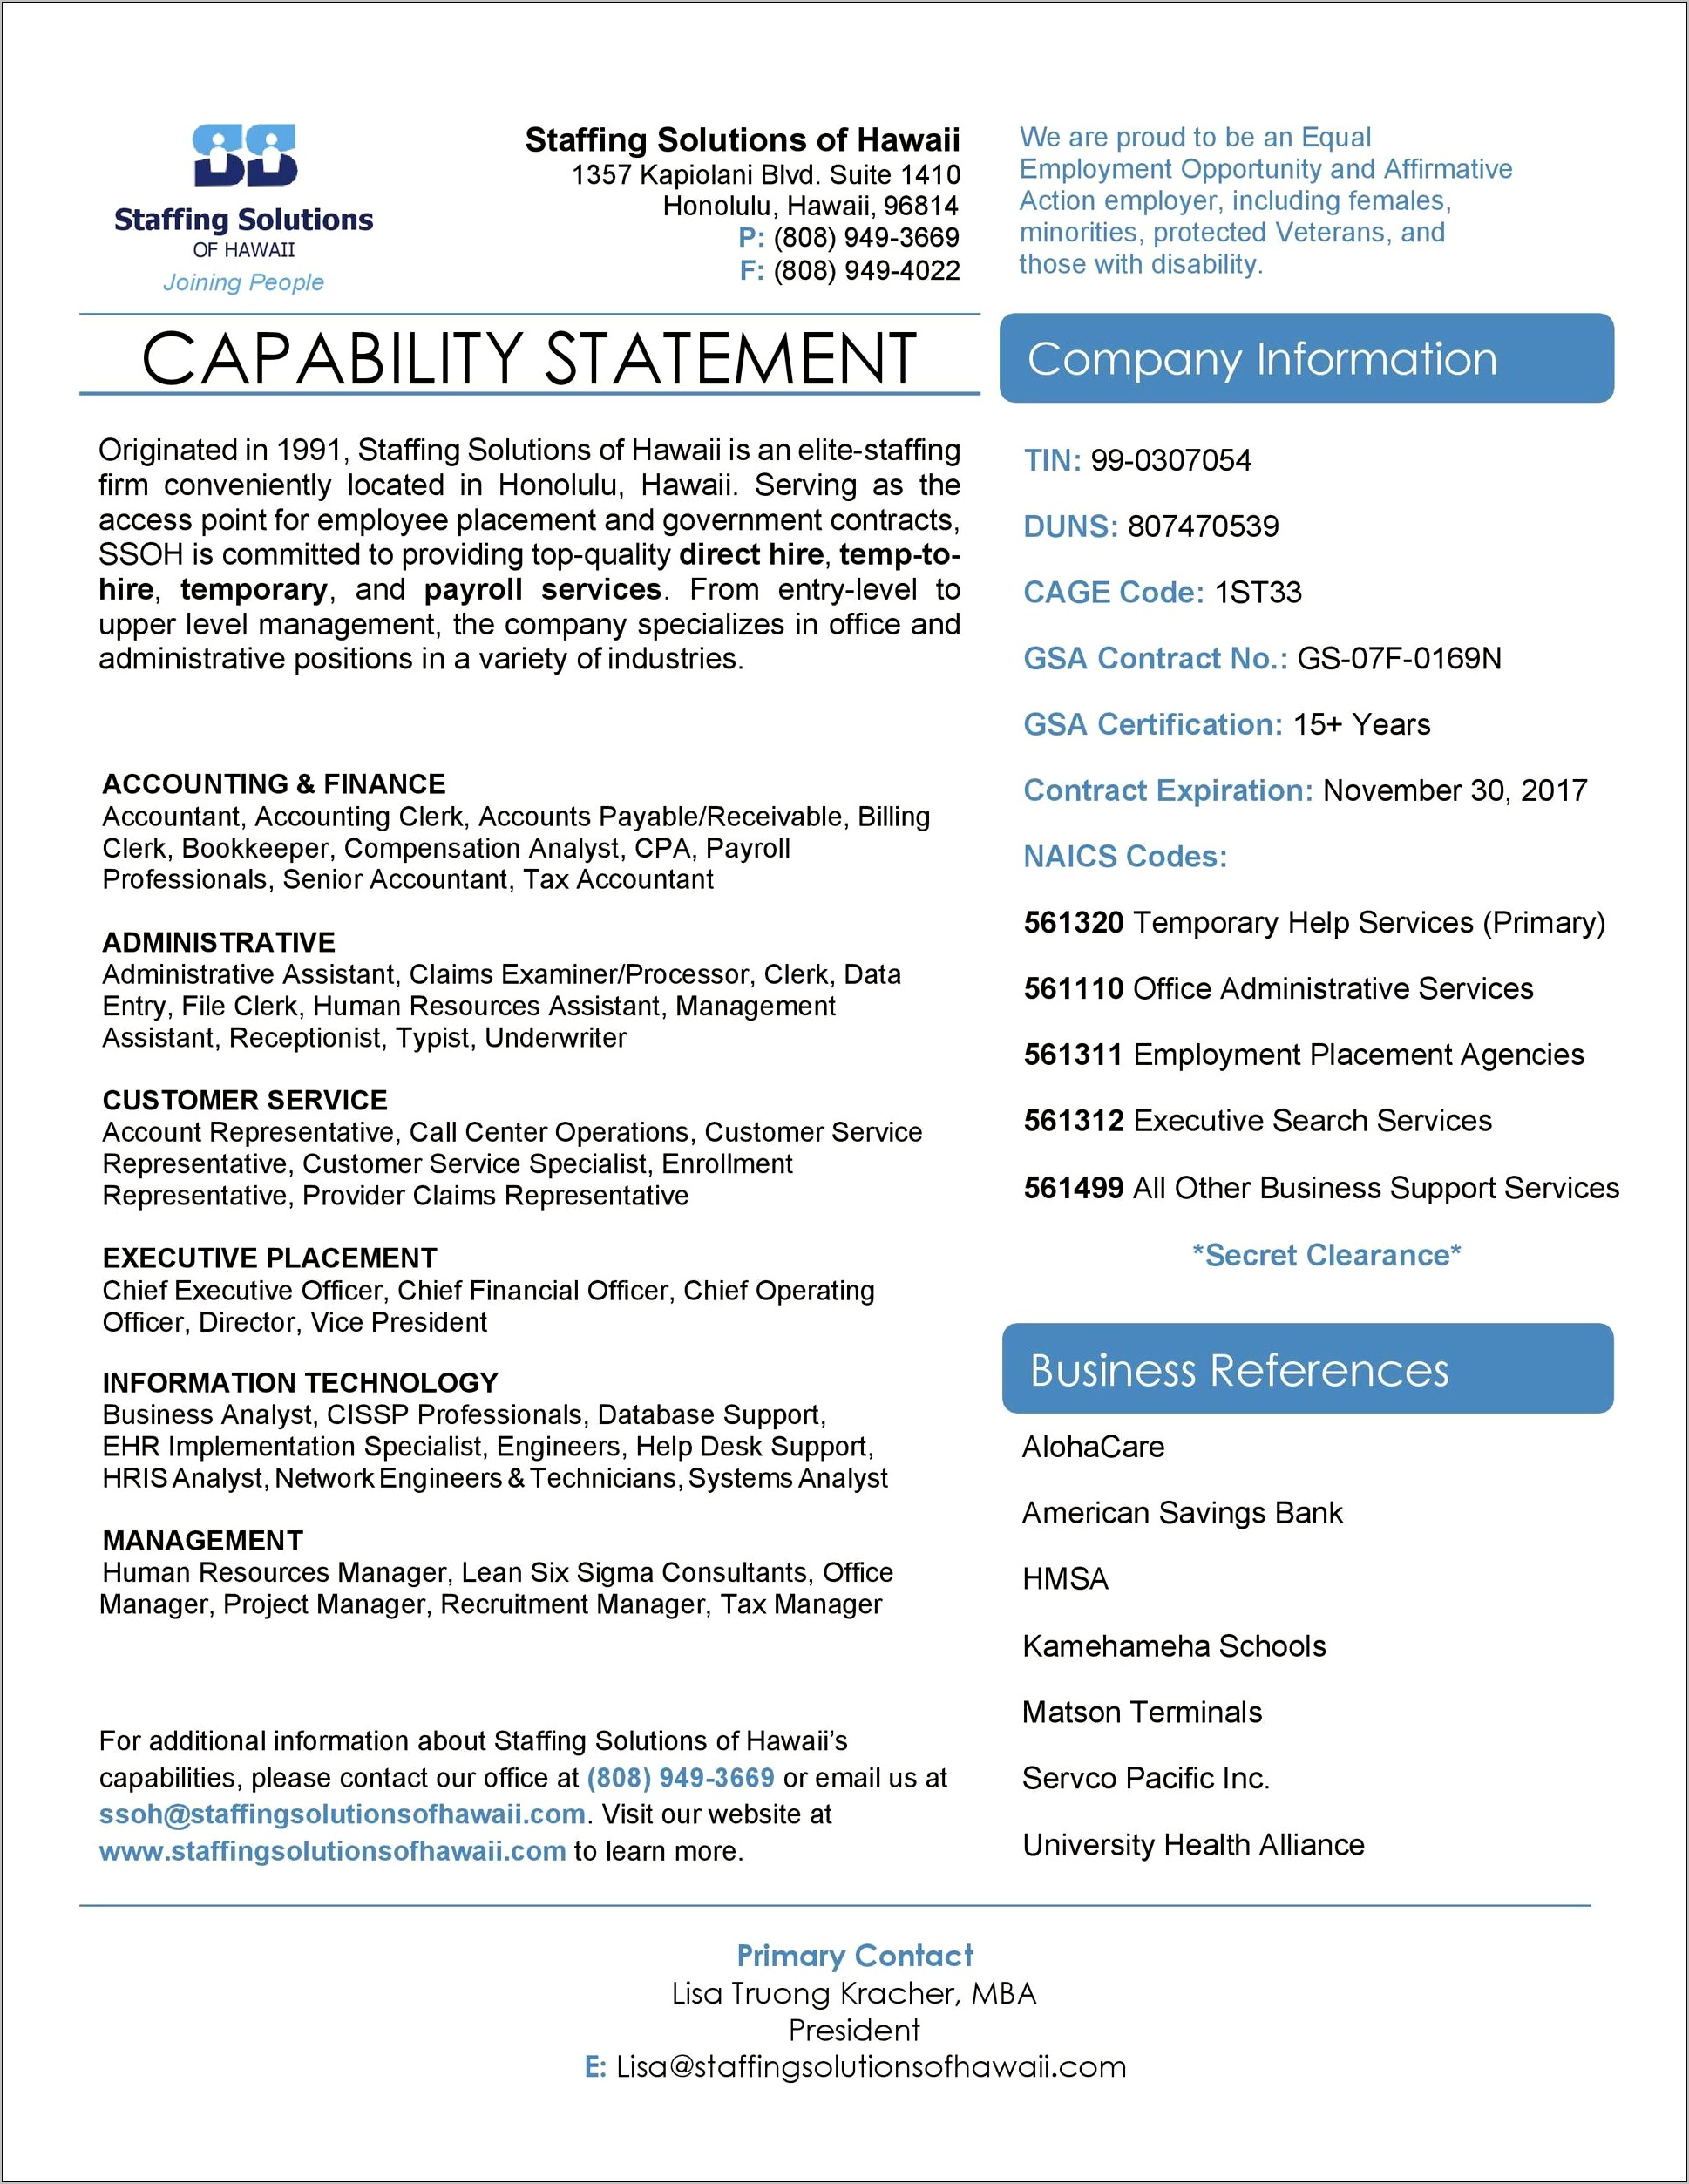 Capability Statement Examples For Resume